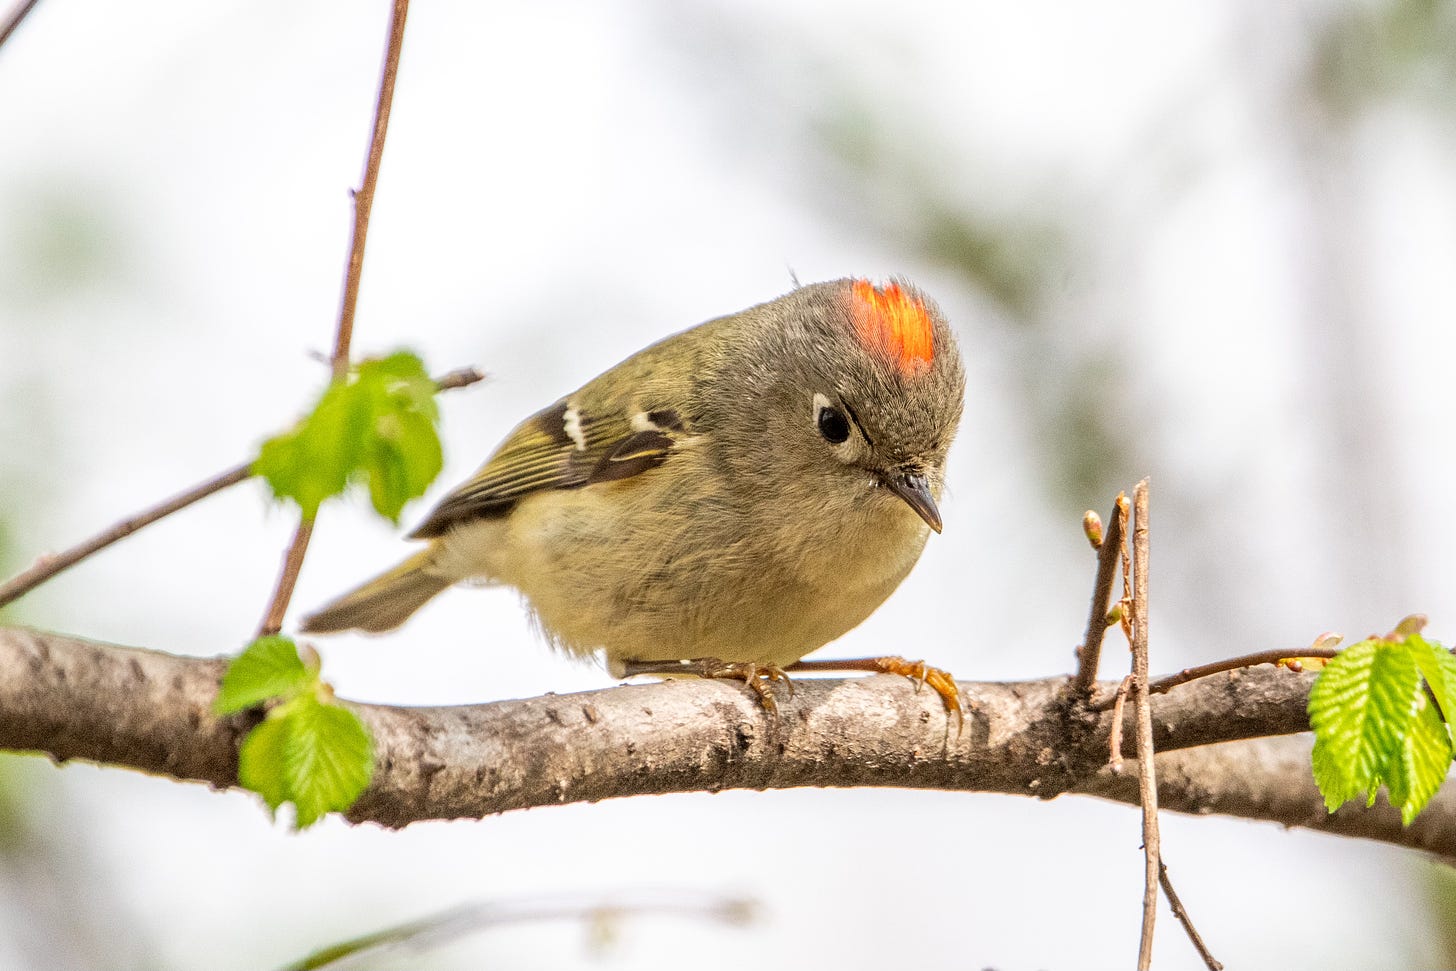 A tiny gray-green bird with a blazing red cap peers down from its perch